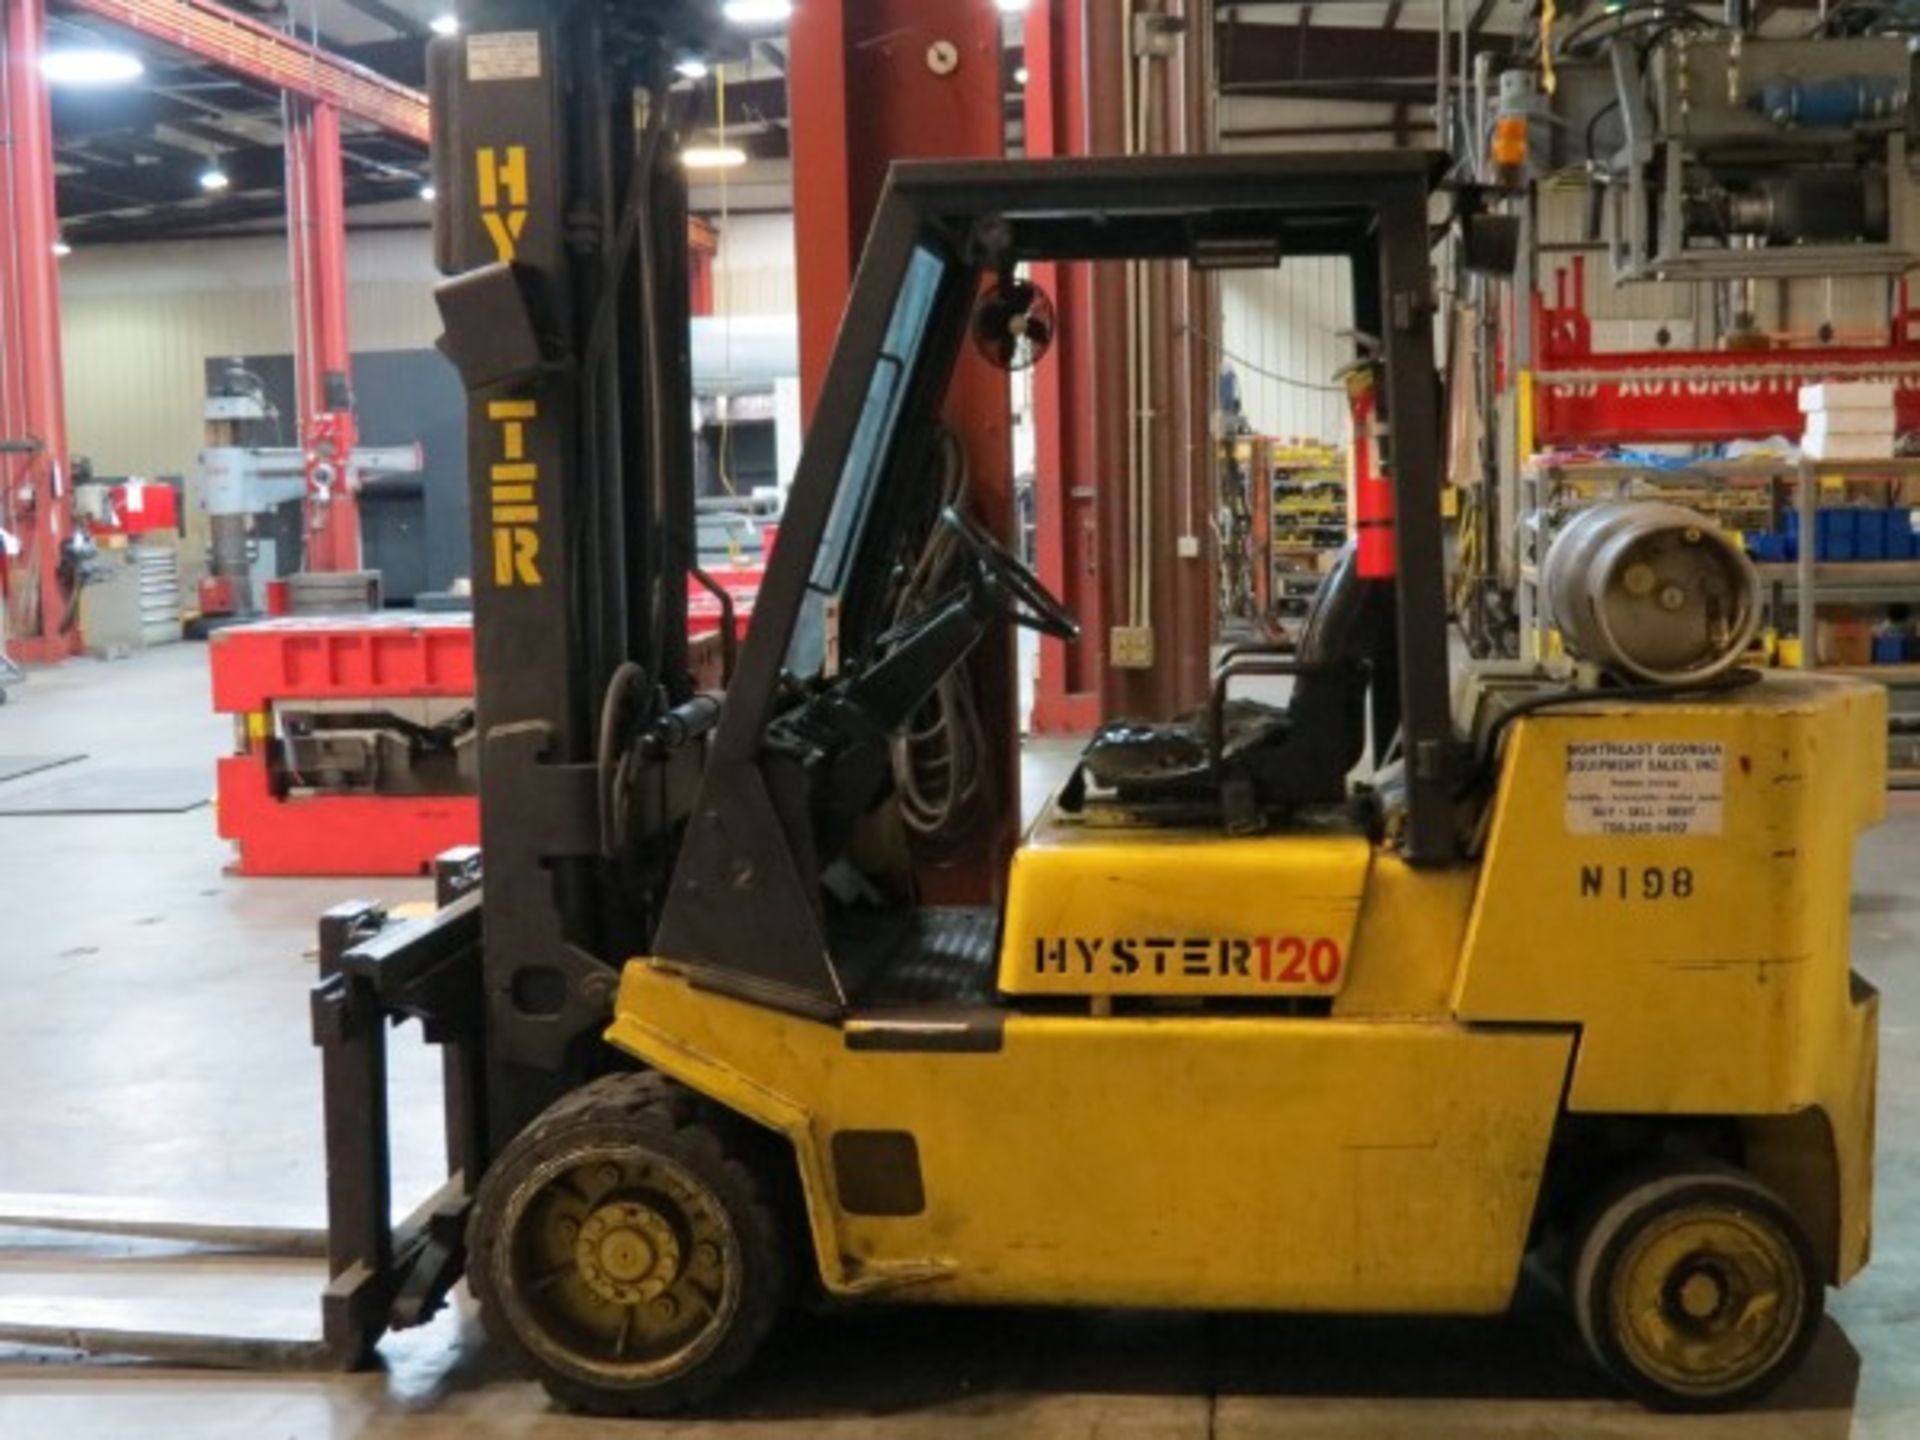 Hyster 120 Forklift 11500 Cap, 49475 hours *Late Delivery 4/26/19*